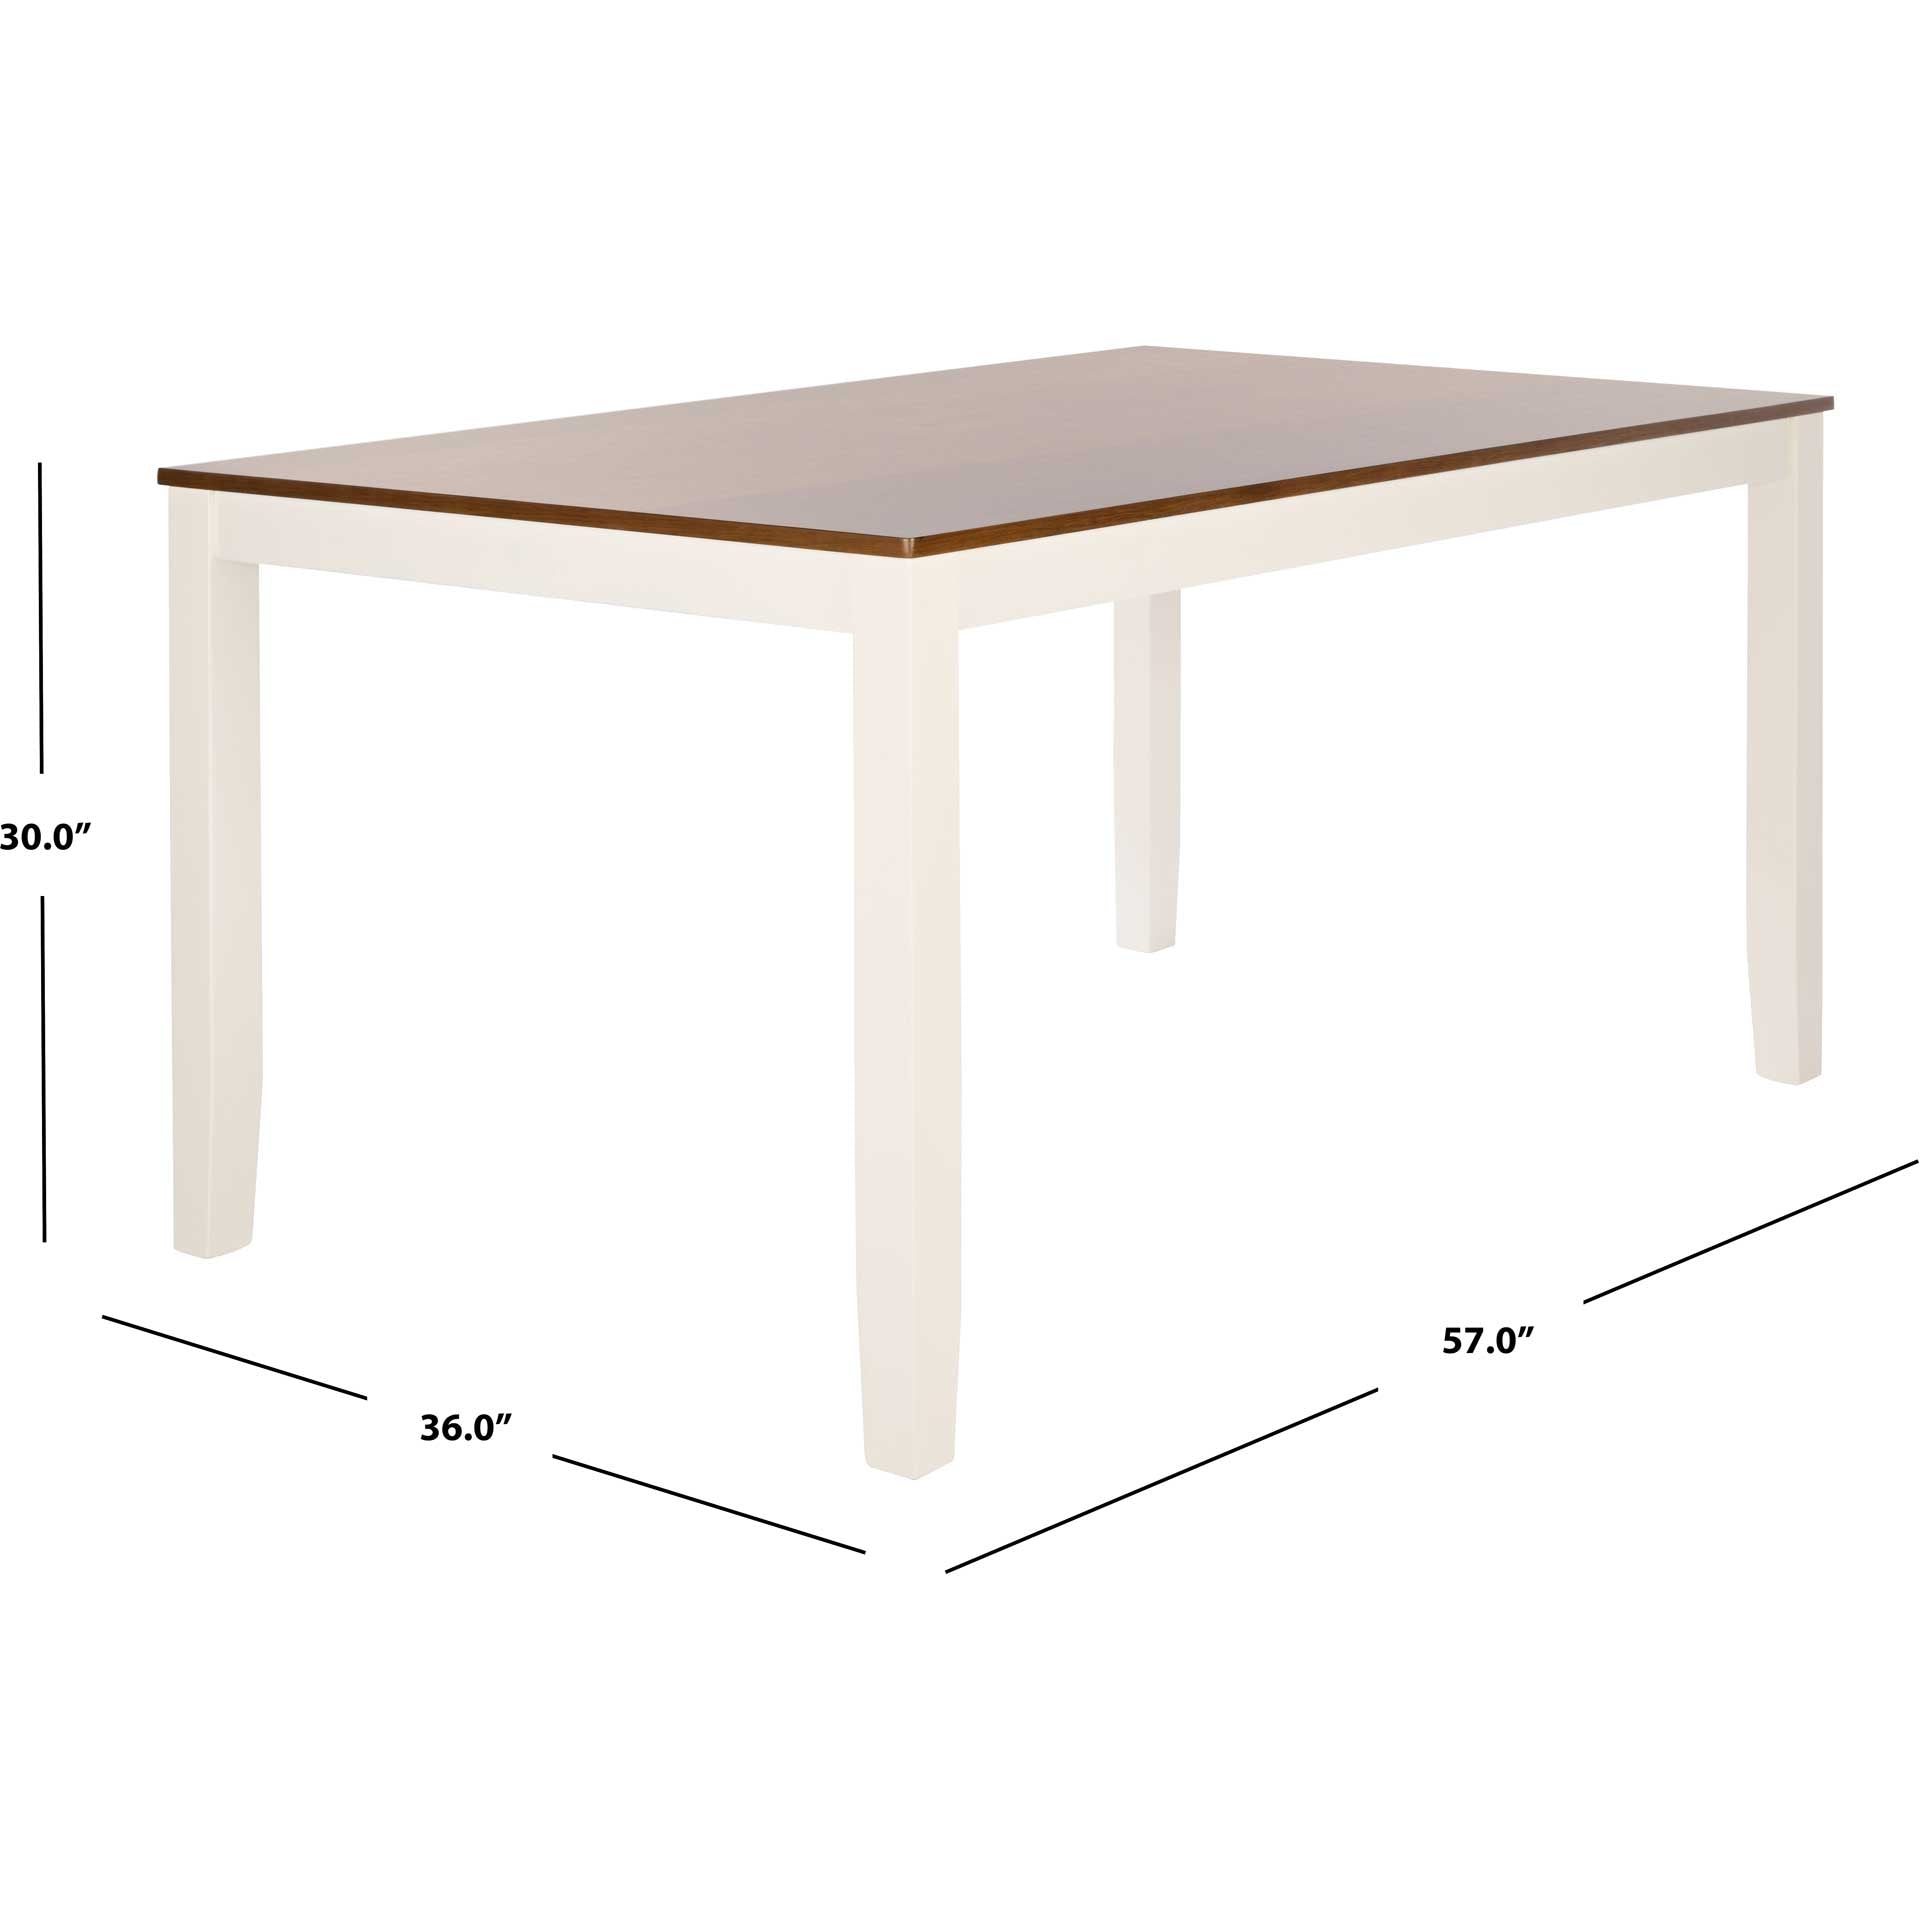 Sicily Rectangle Dining Table White/Natural